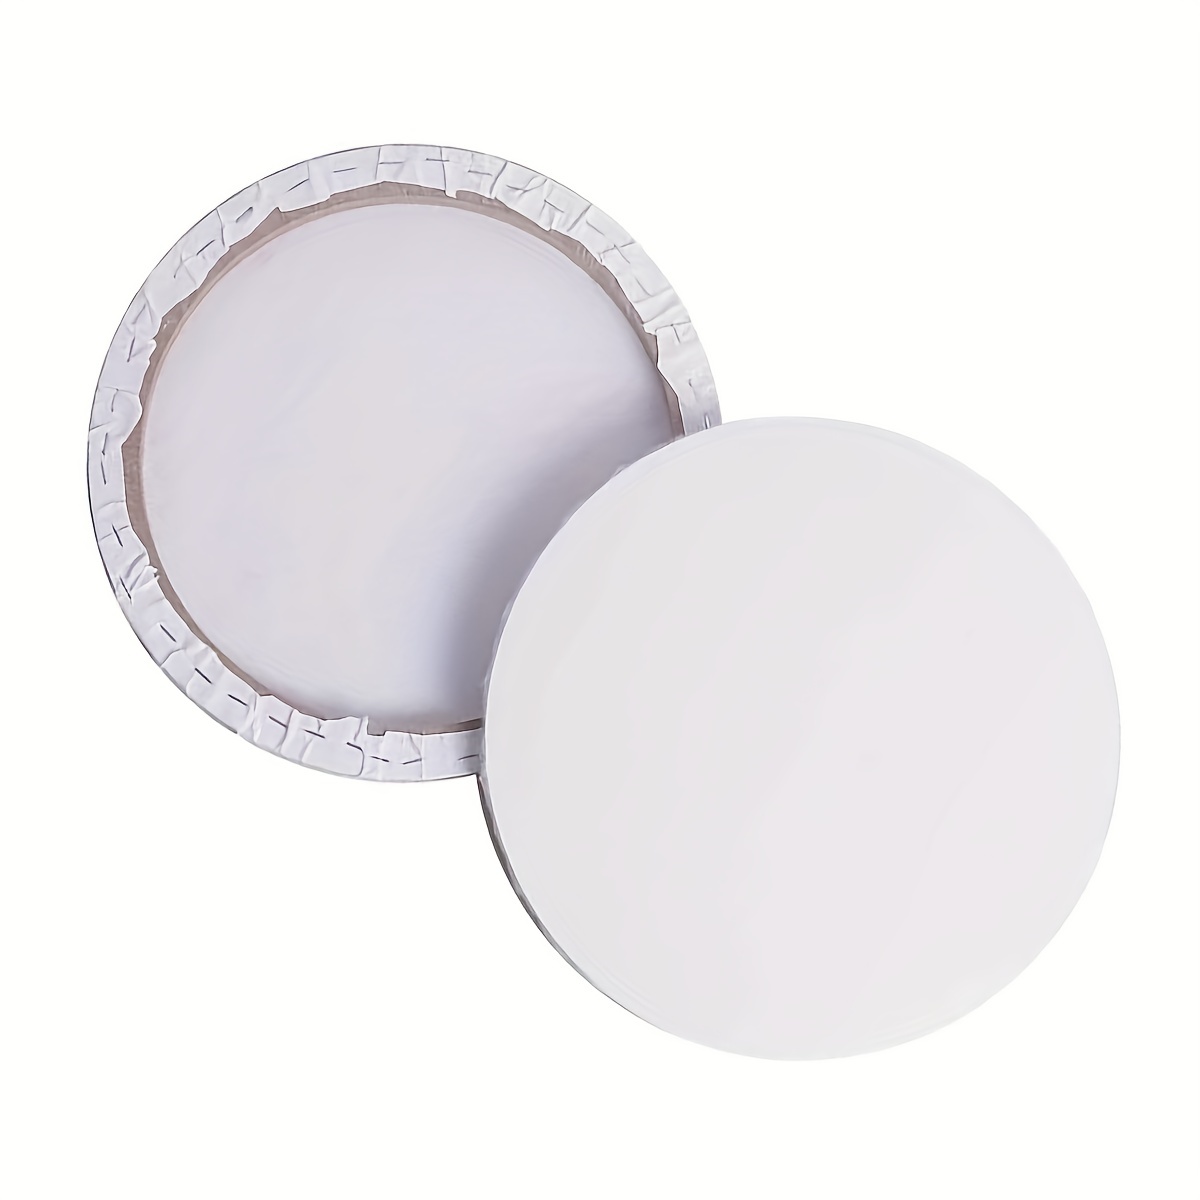 Canvas Painting Board Round Artist Boards Panels Panel Oil Stretched Blank  Acrylic Drawing White Circle Large